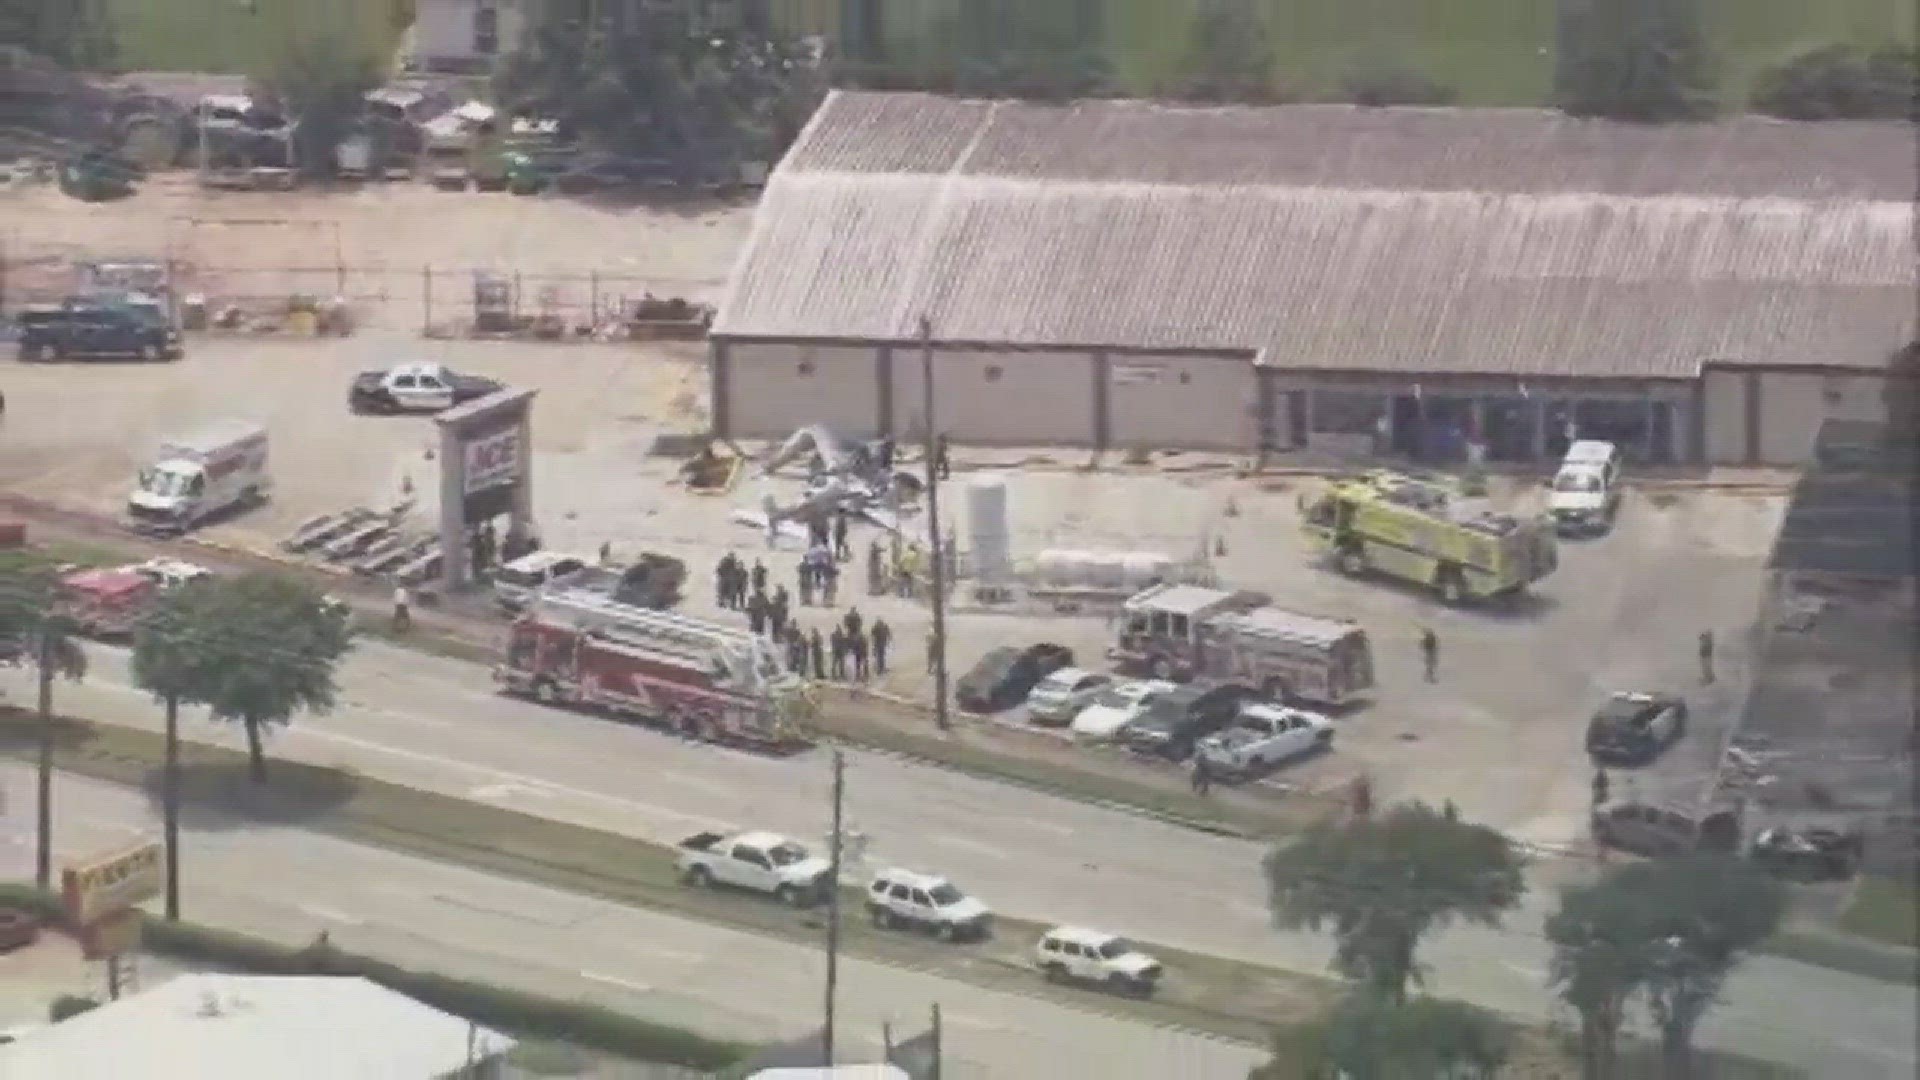 Three people were killed when a small plane crashed near Hobby Airport Thursday afternoon, according to the Houston Fire Department.